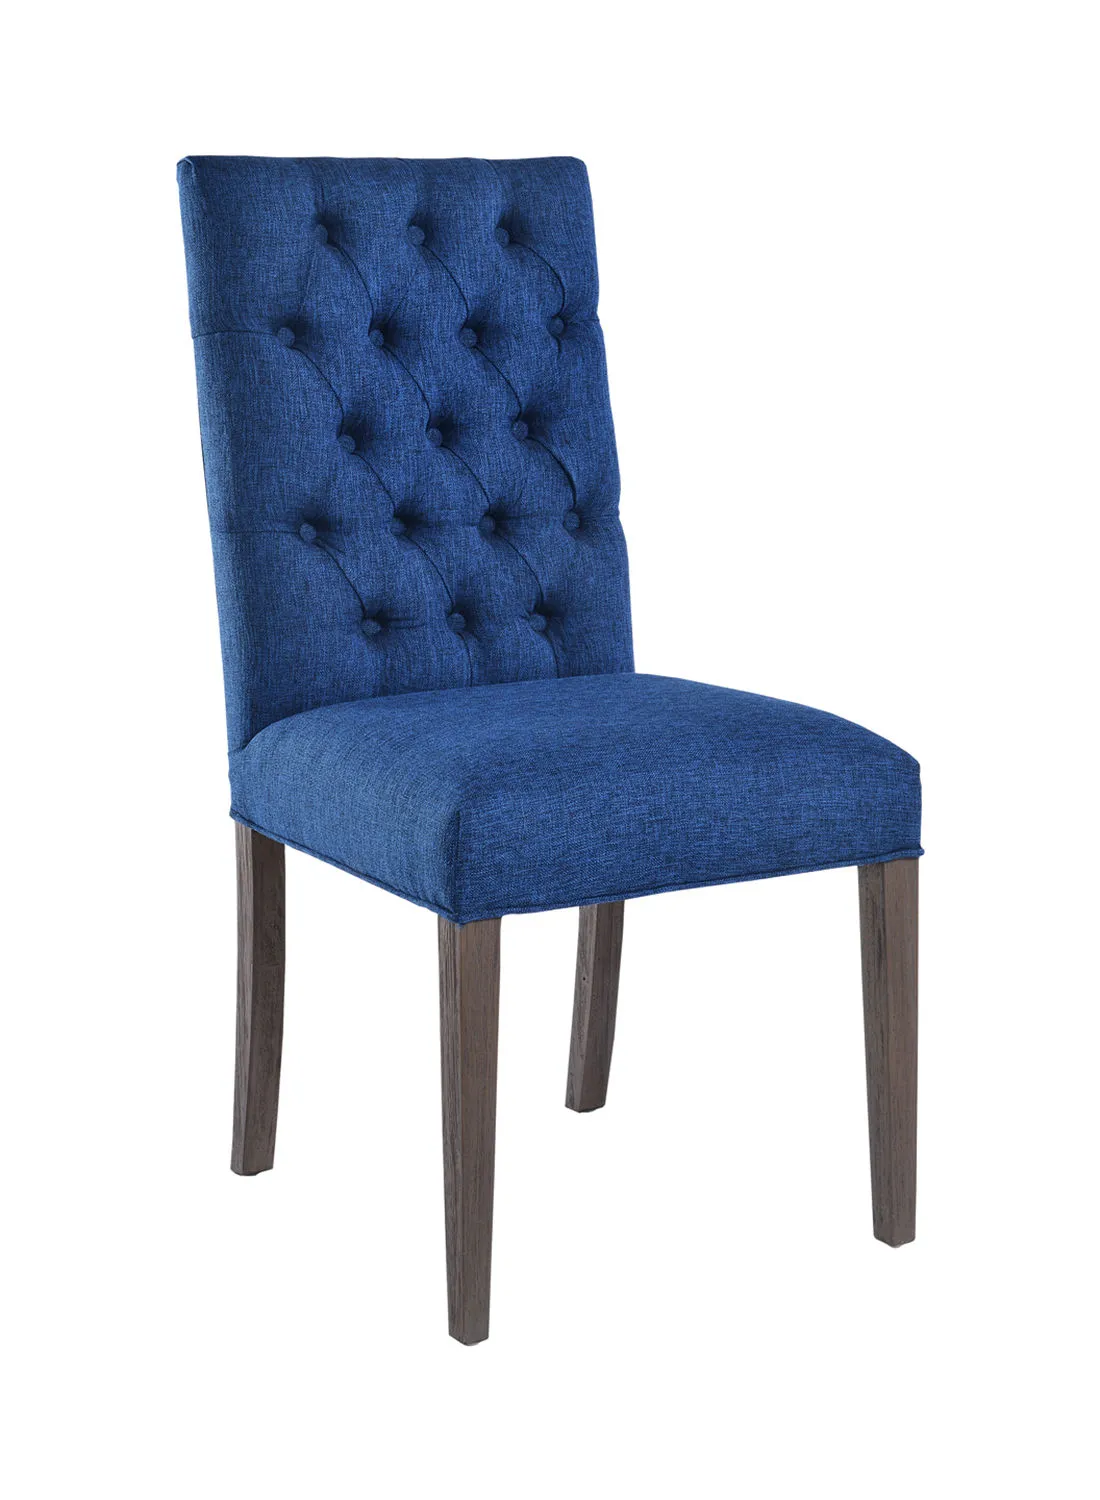 ebb & flow Dining Chair Luxurious - In Oak/Blue Wooden Chair Size 52 X 64 X 105